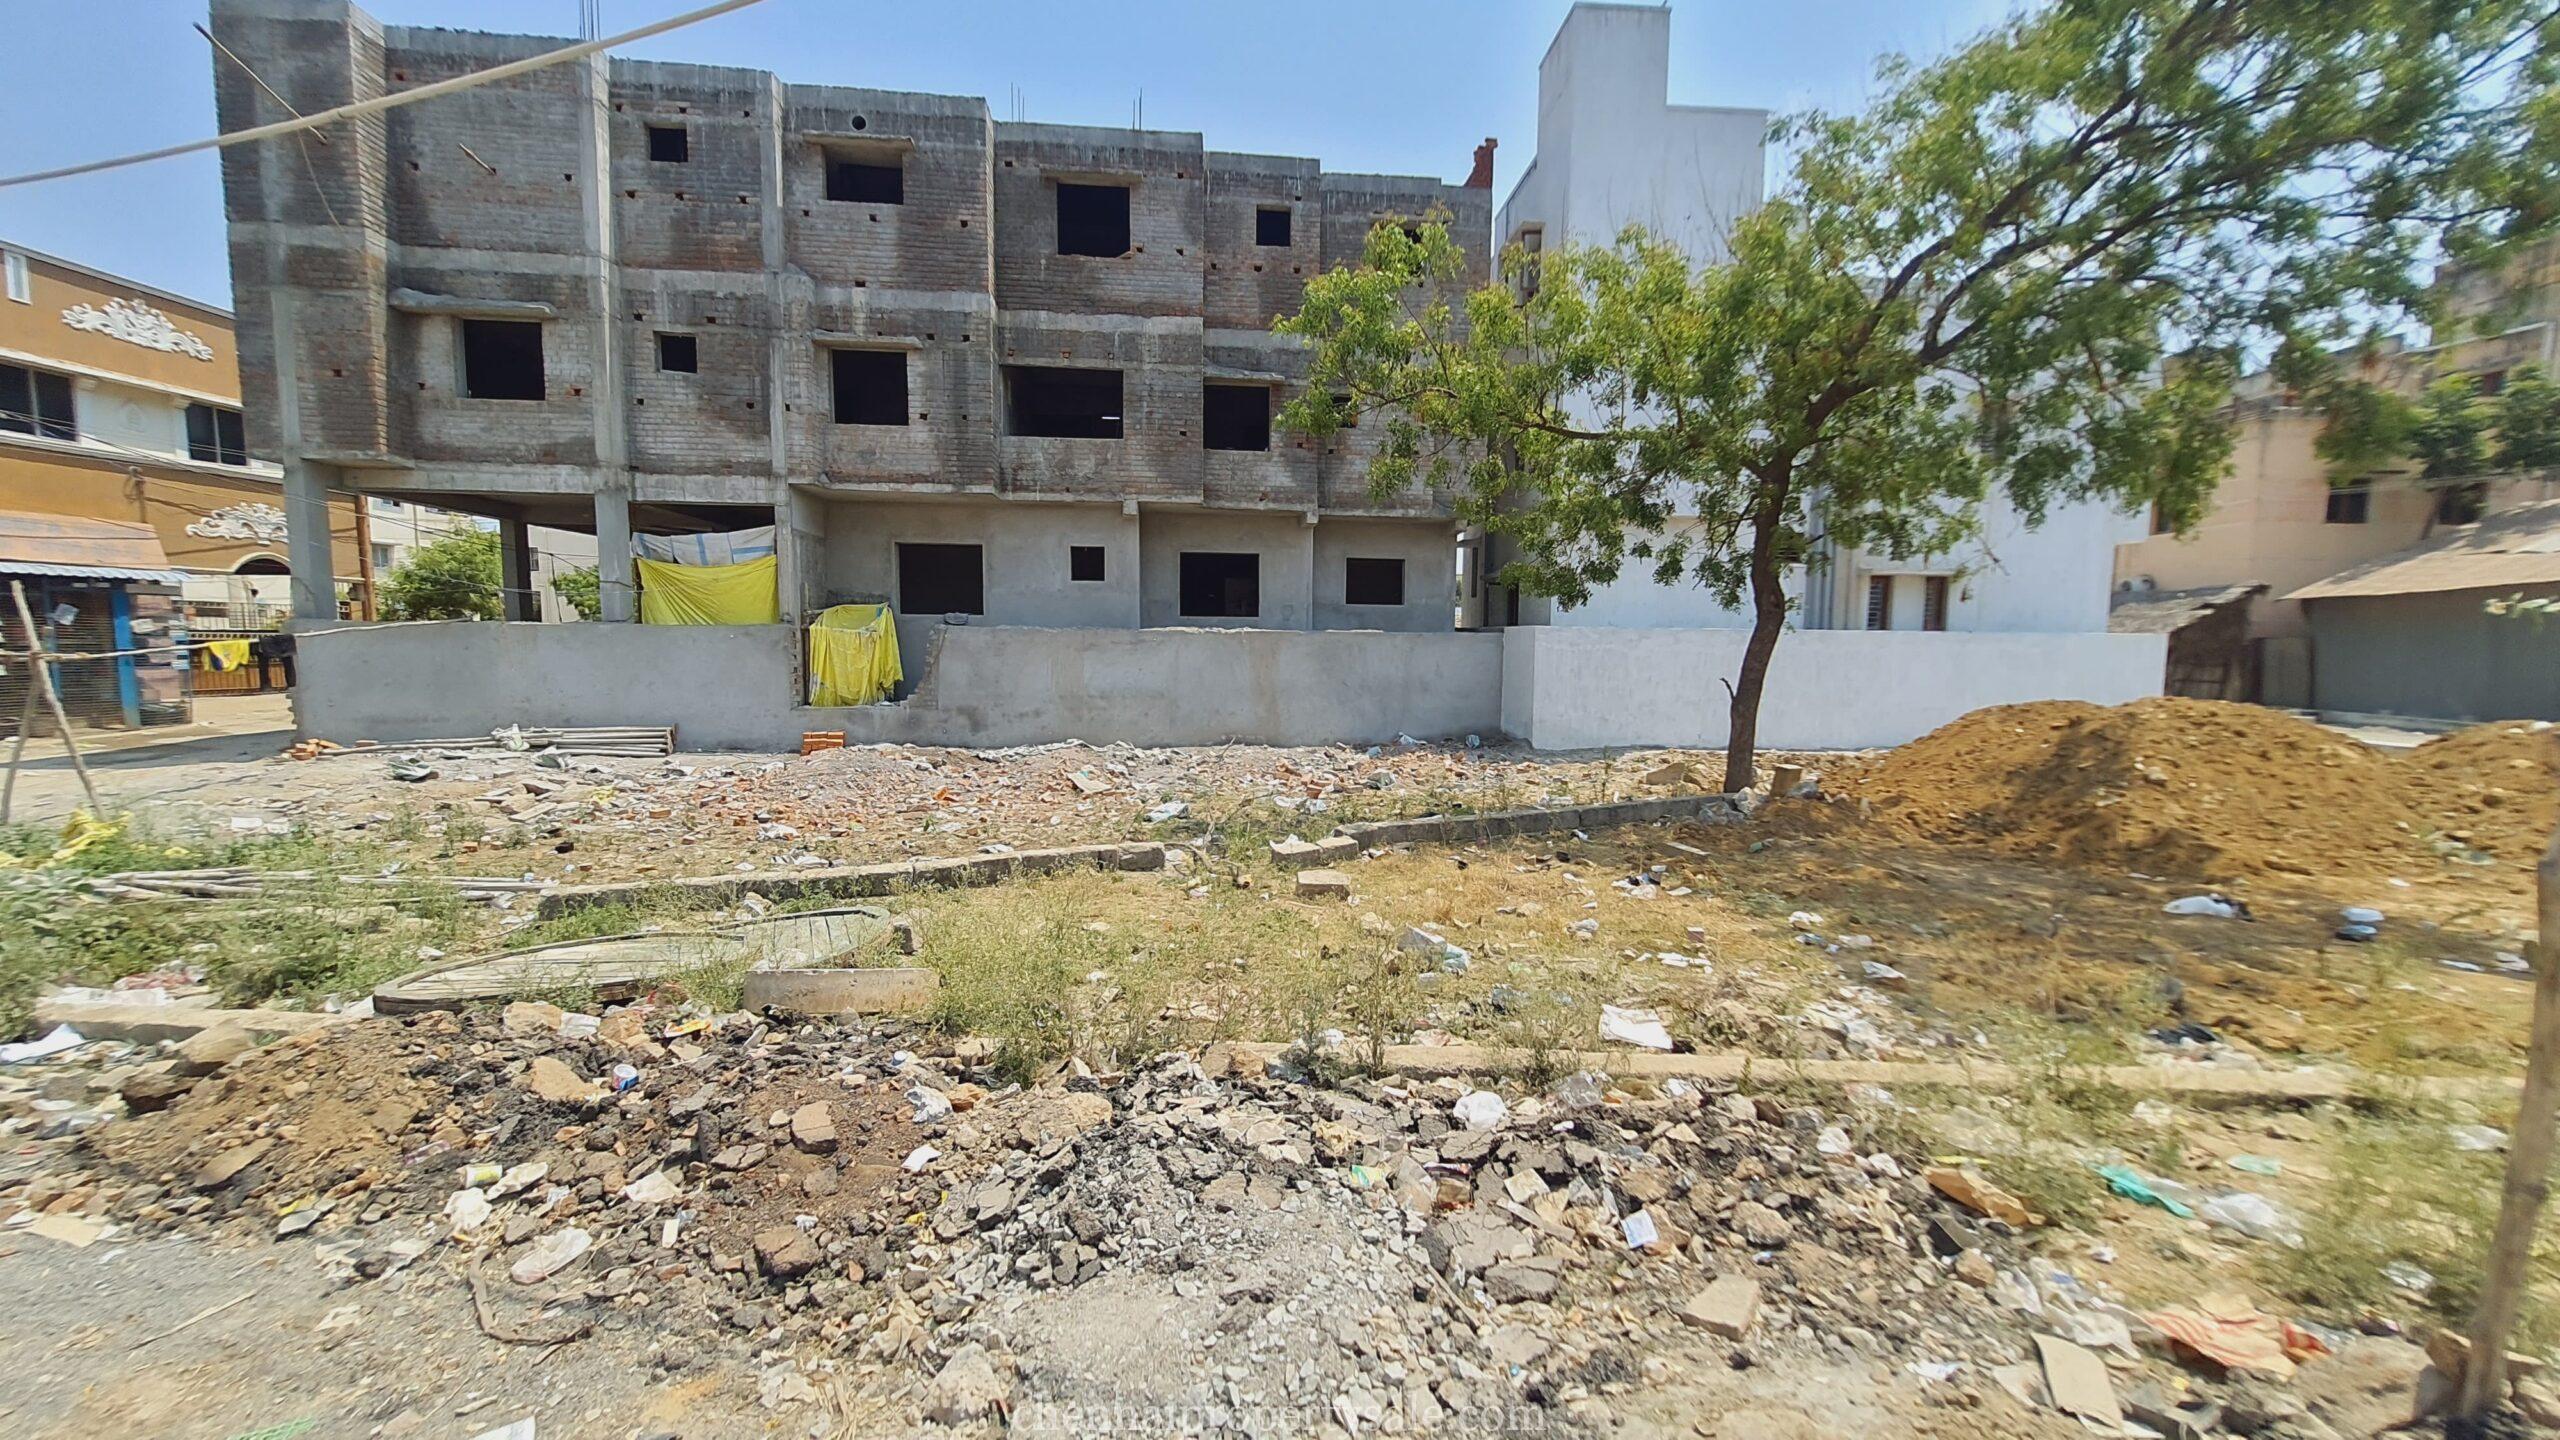 cmda approved plot sale in iyyapanthangal 